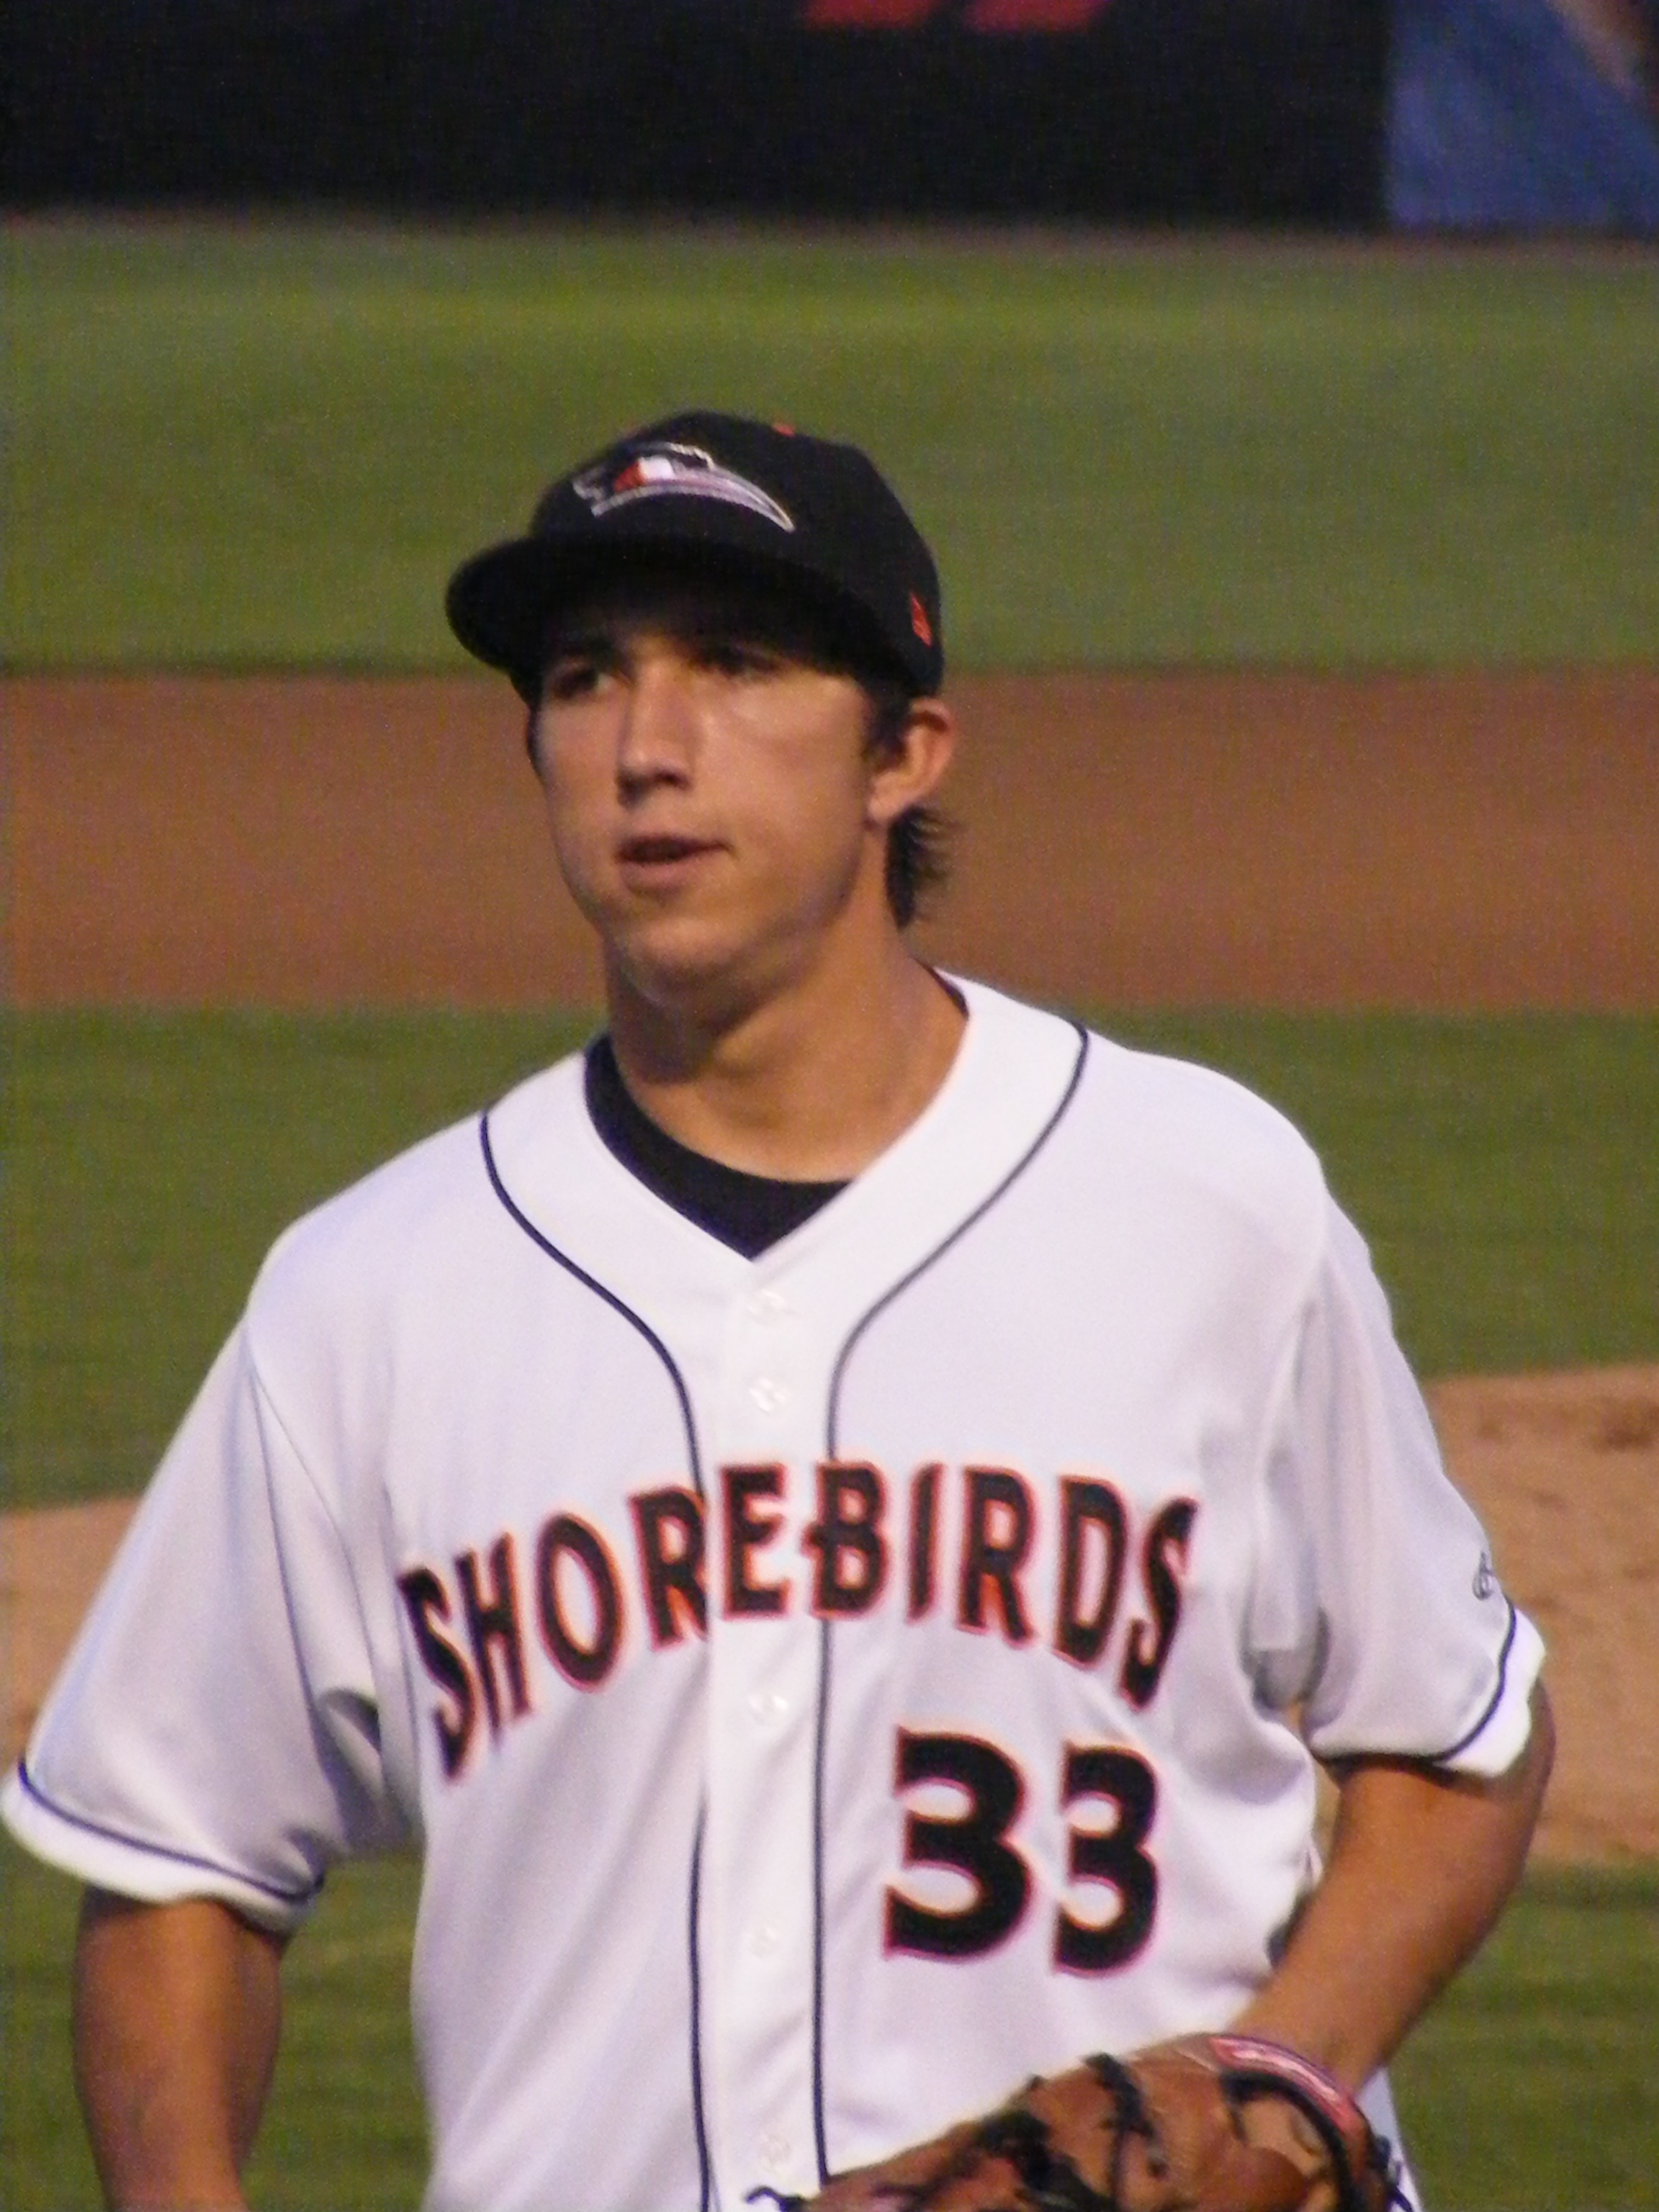 David Baker looked relieved to be through an inning, but in truth he has pitched well for Delmarva.